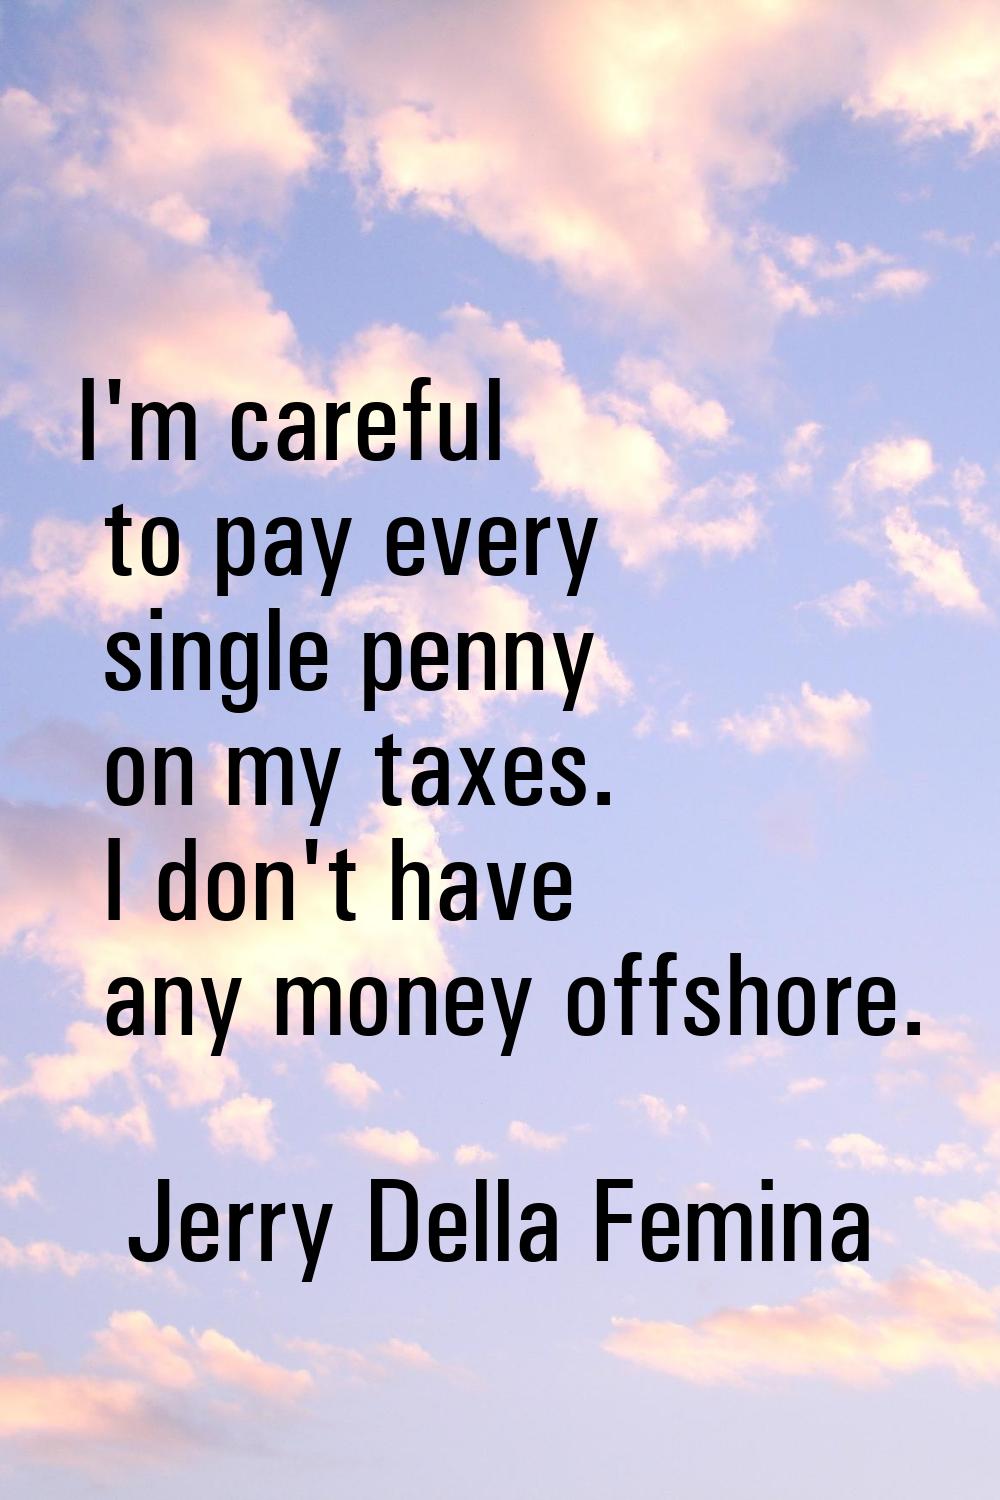 I'm careful to pay every single penny on my taxes. I don't have any money offshore.